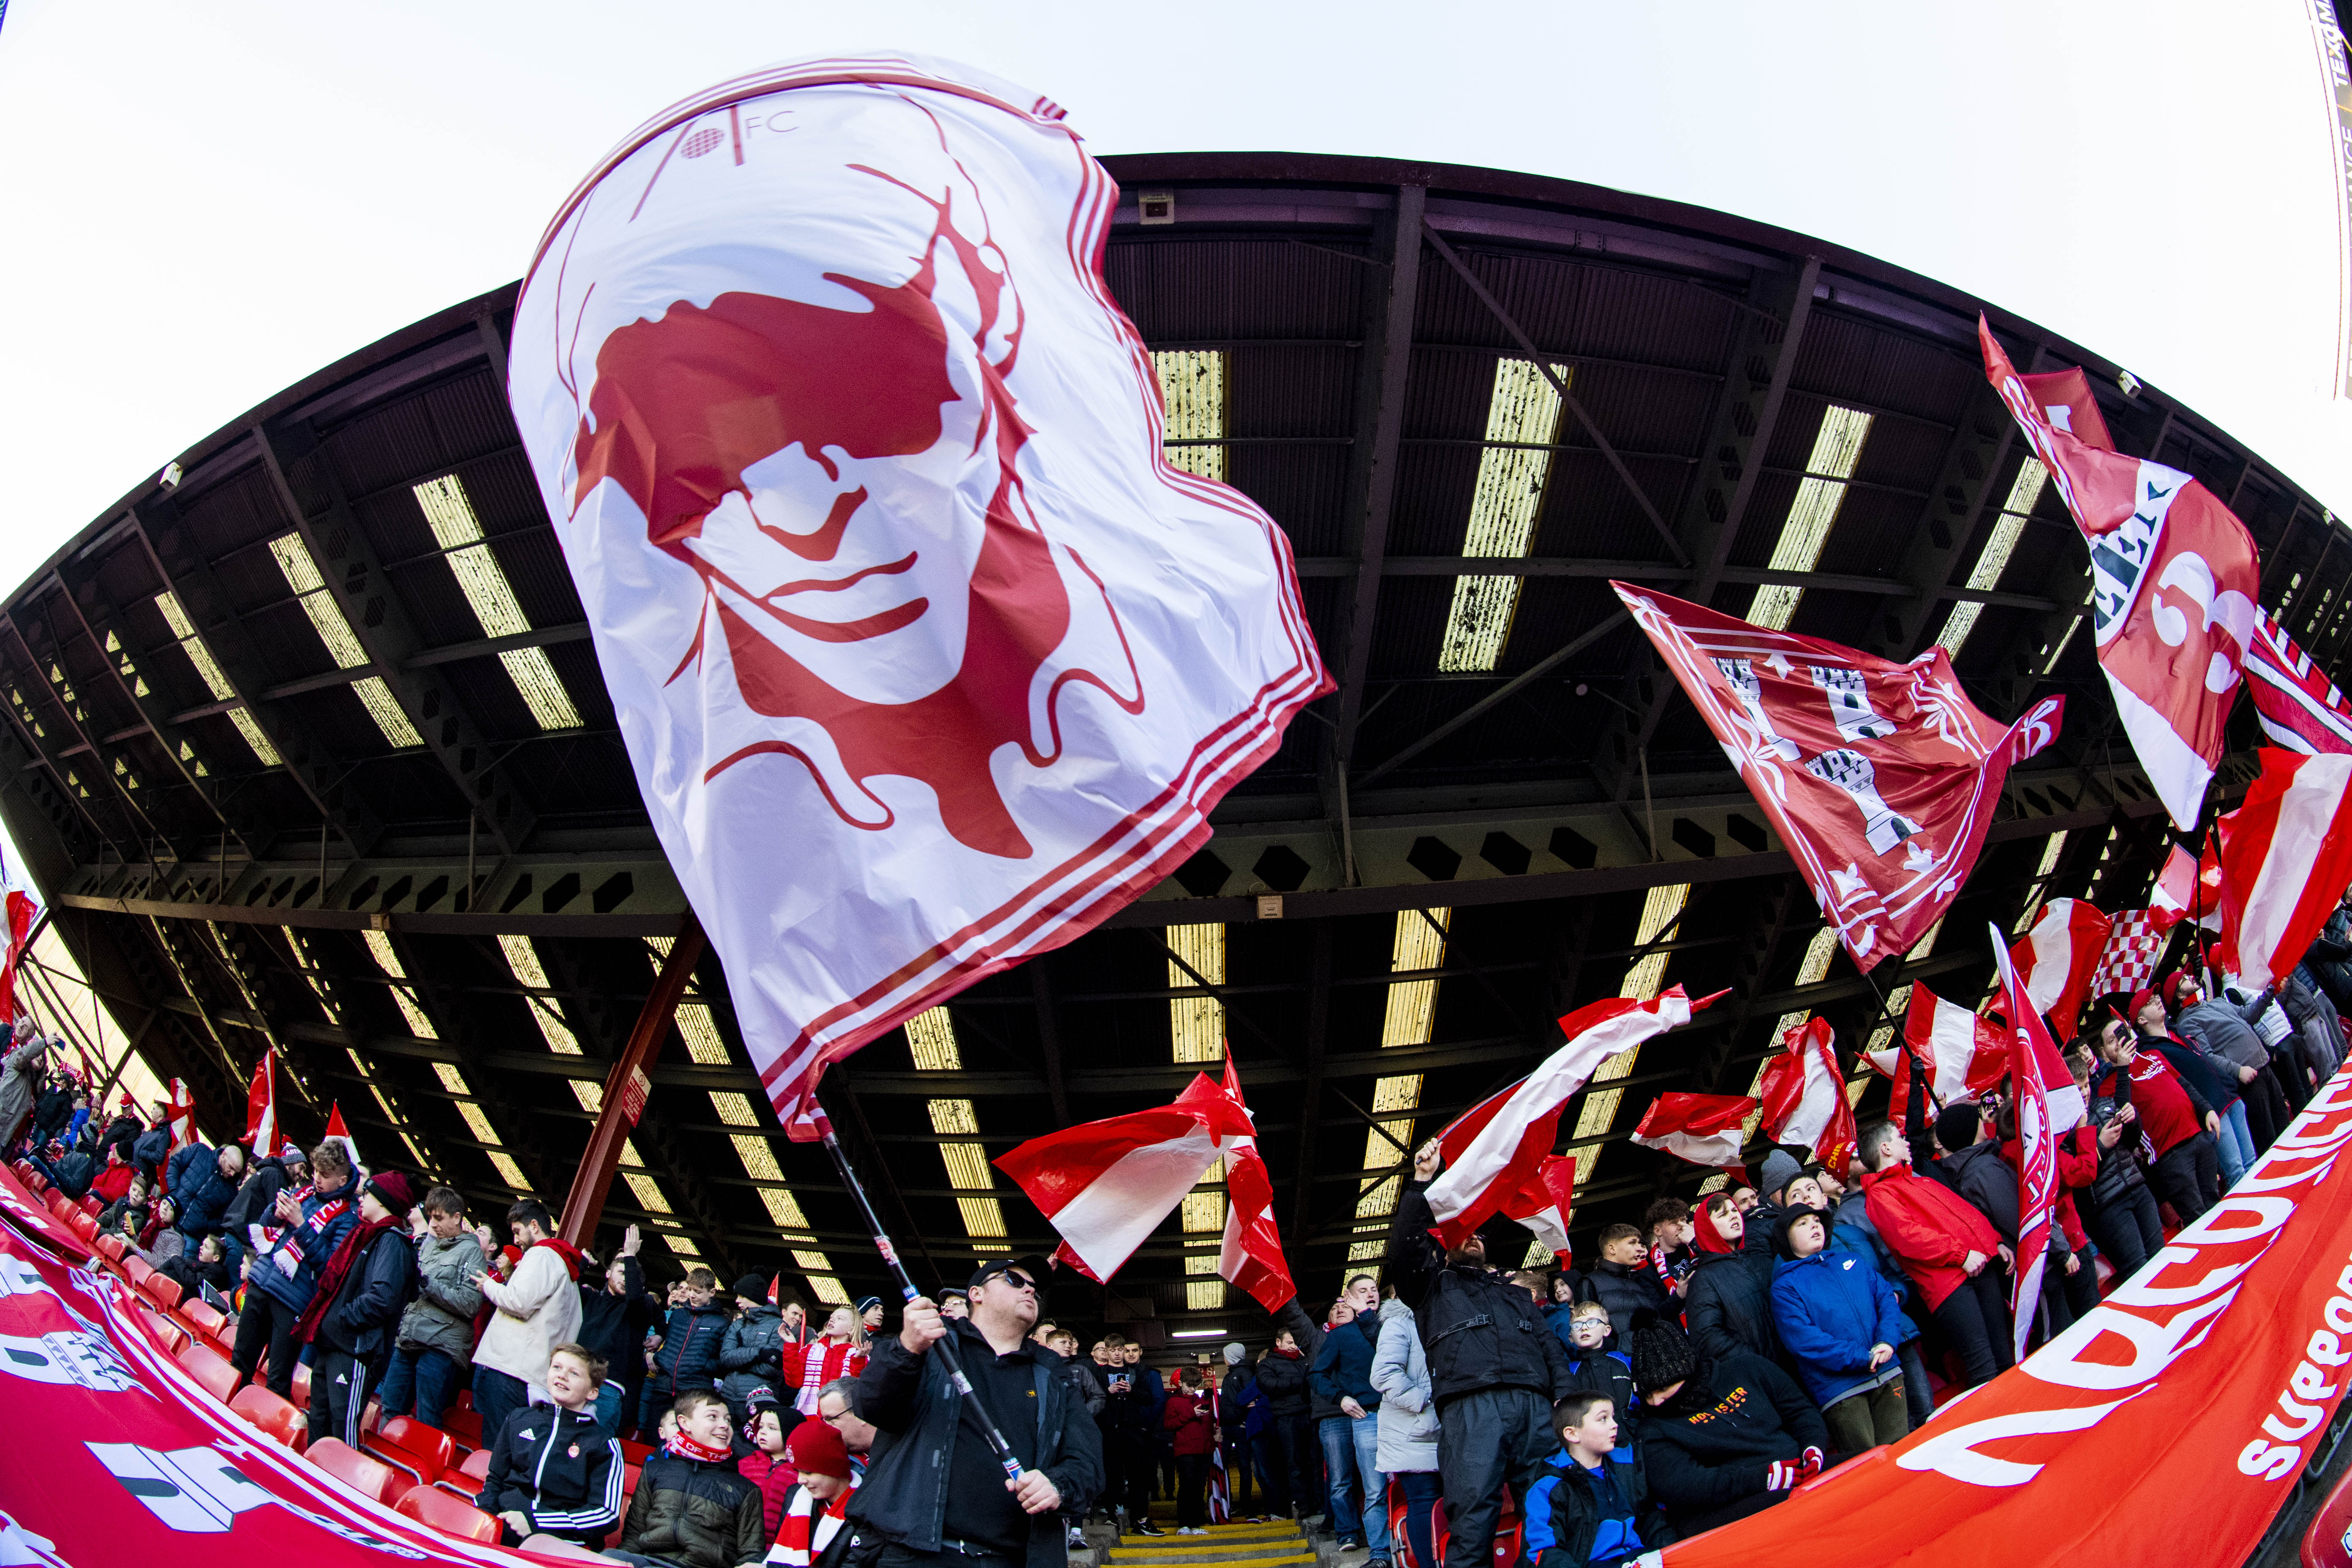 Aberdeen will face Hearts on April 3